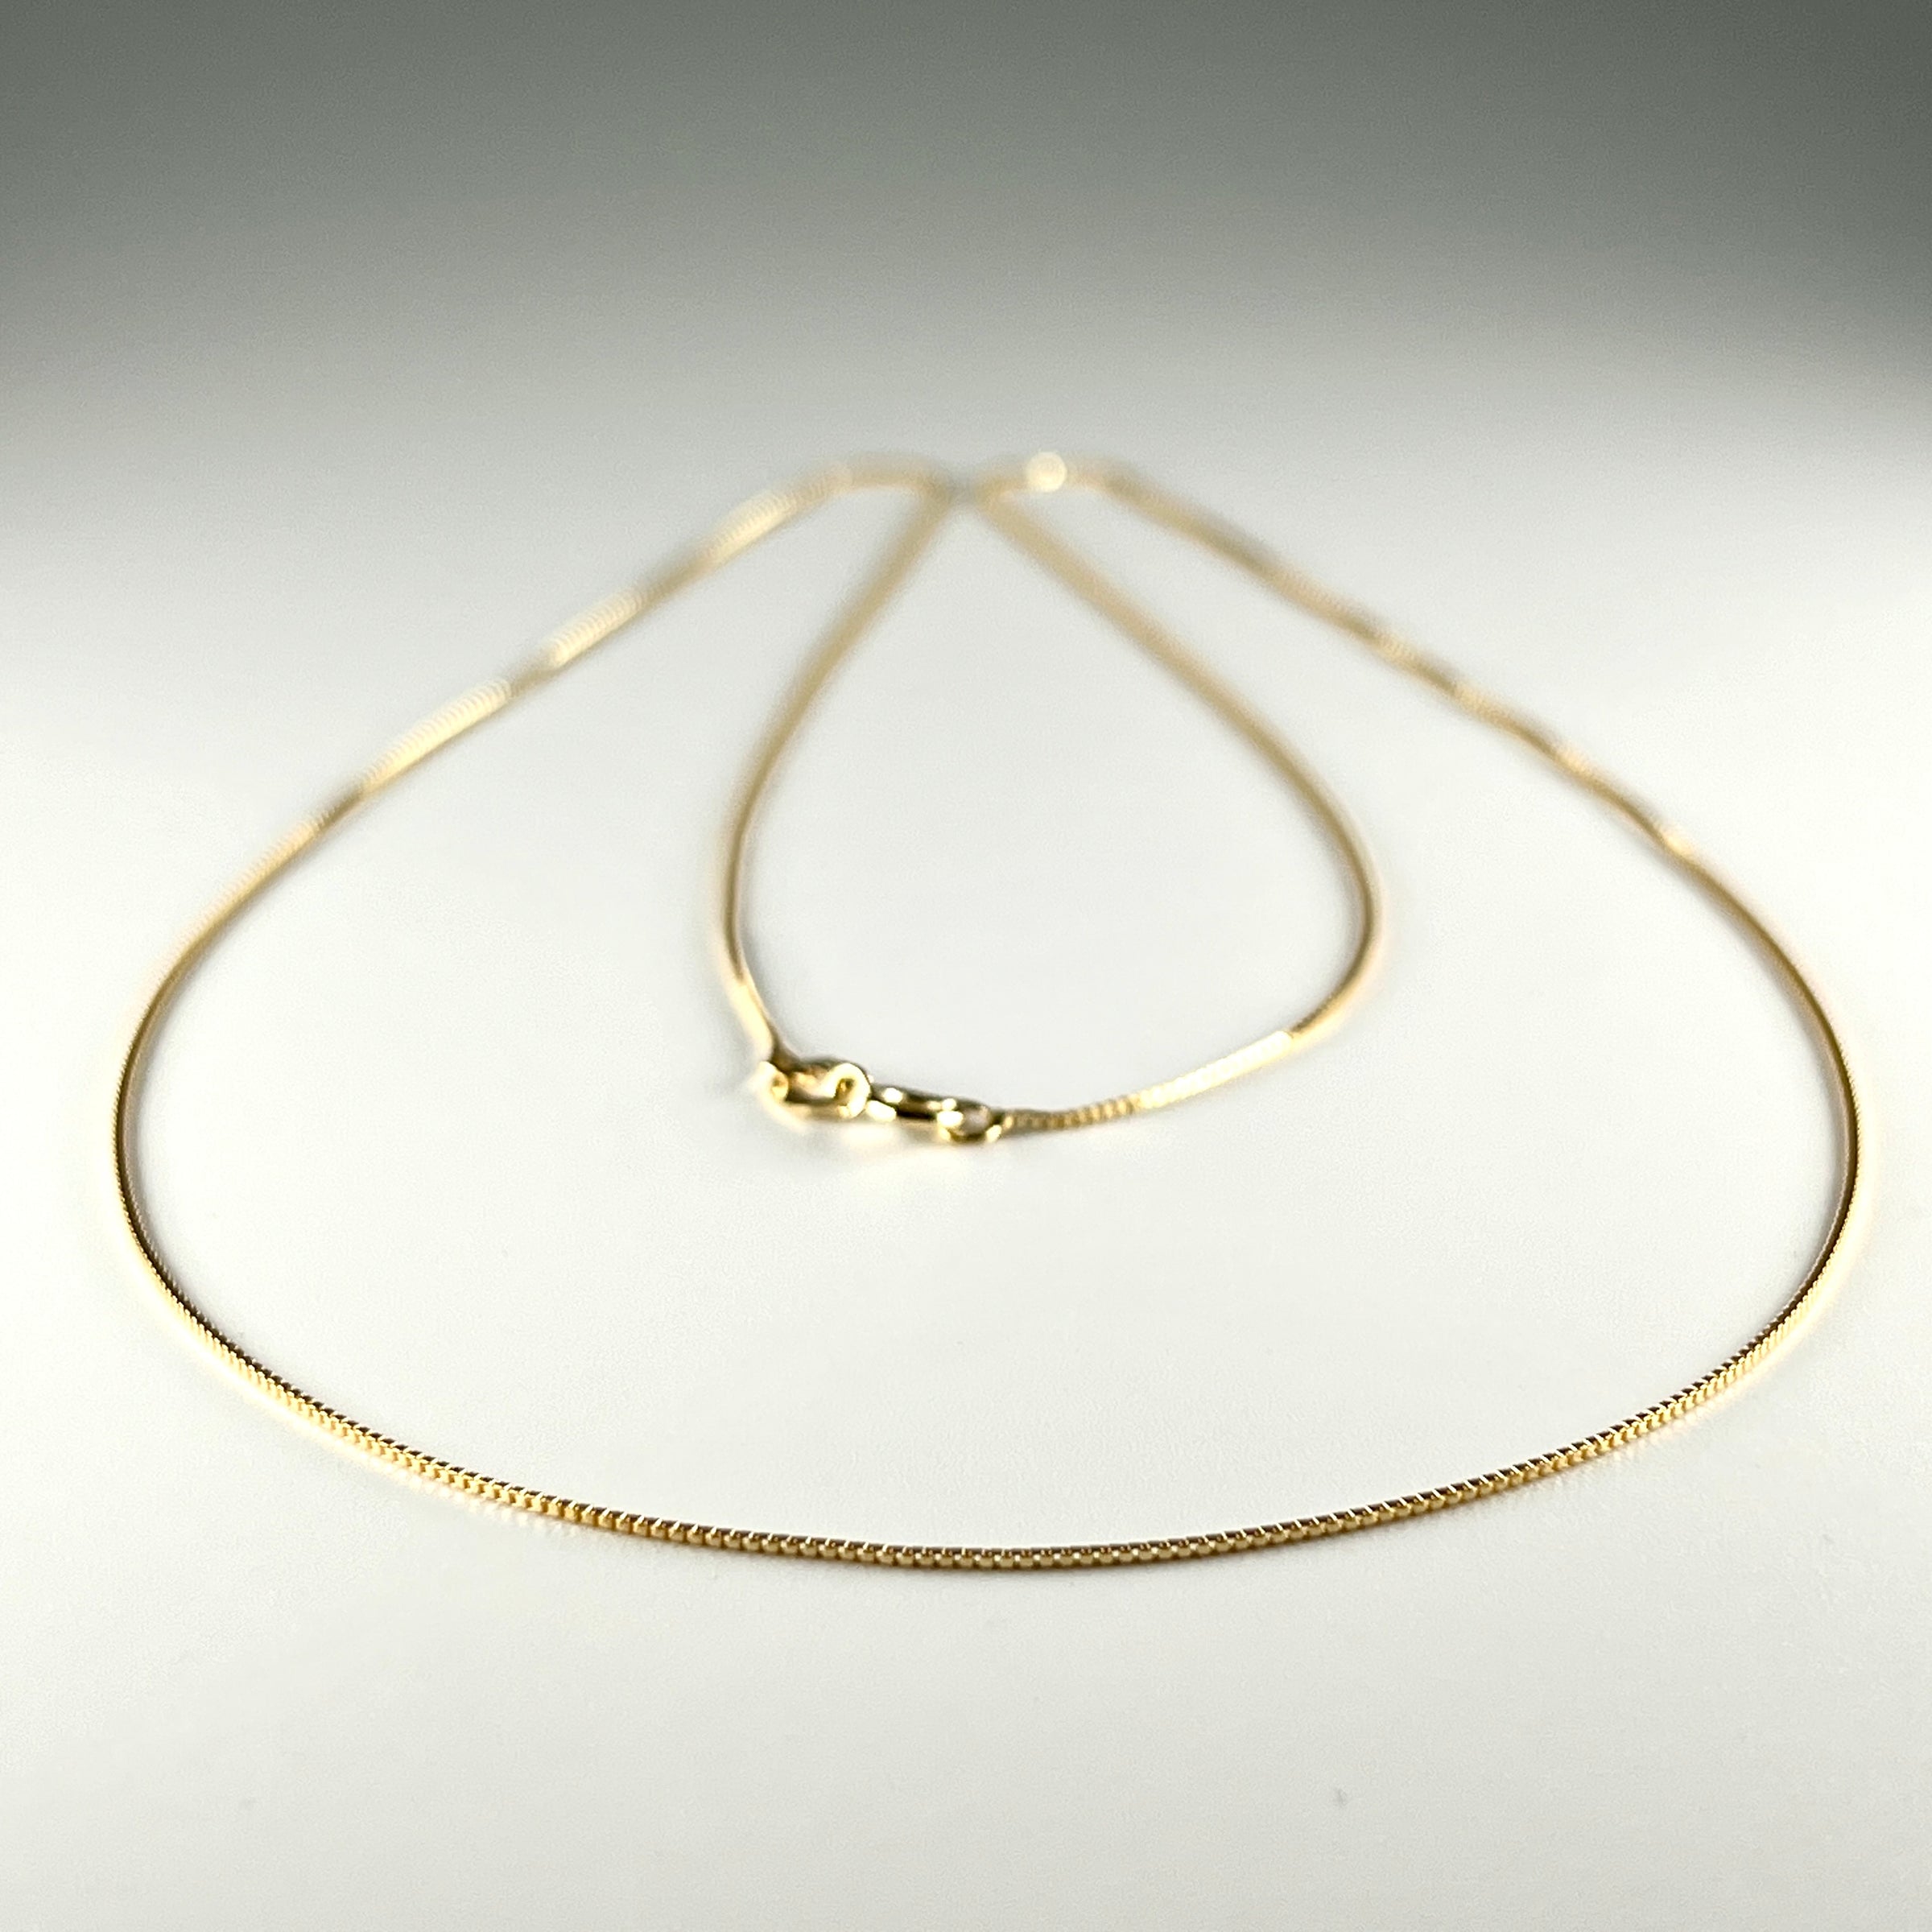 10K Yellow Gold 20" Box Link Chain Necklace